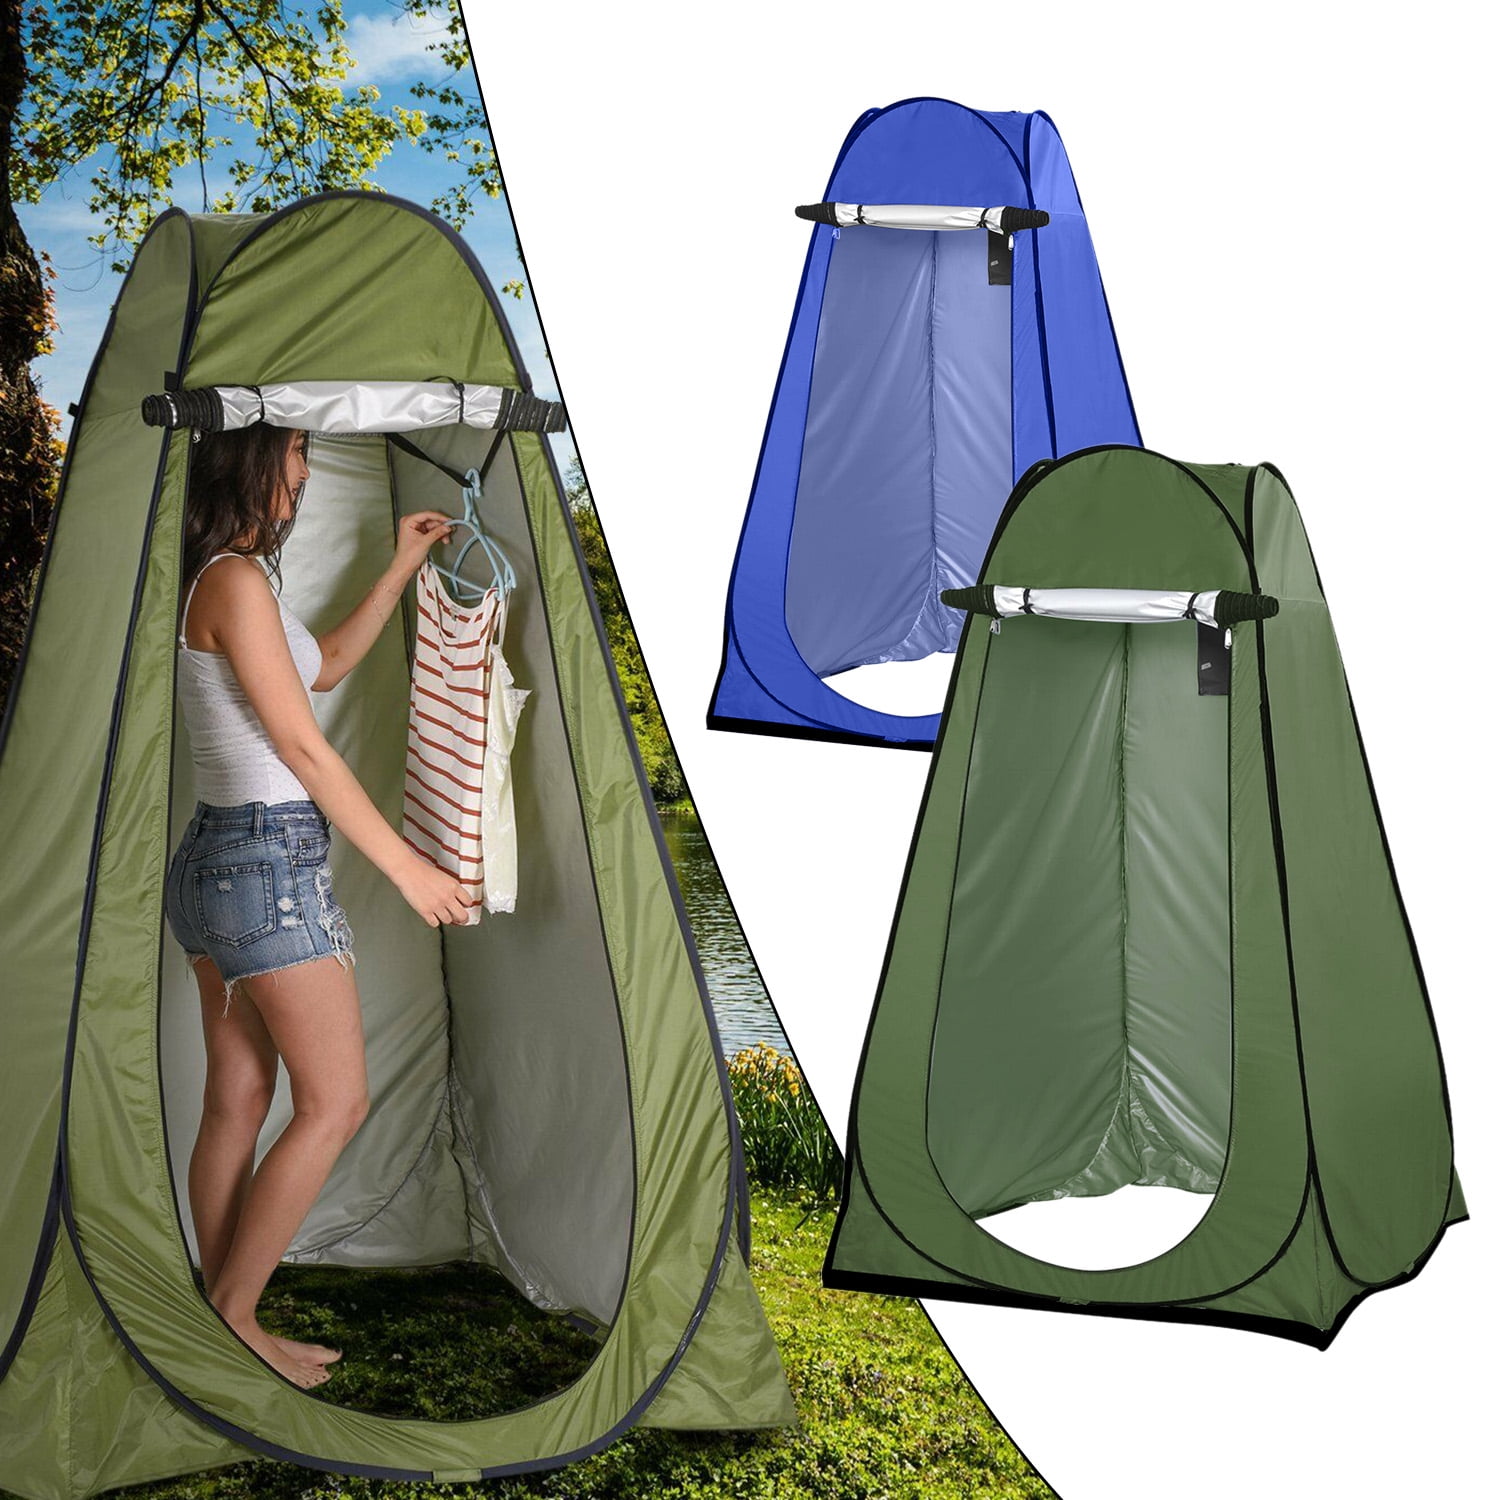 Pop-Up Privacy Tent Portable Outdoor Camping Shower Toilet Changing Room Hiking 